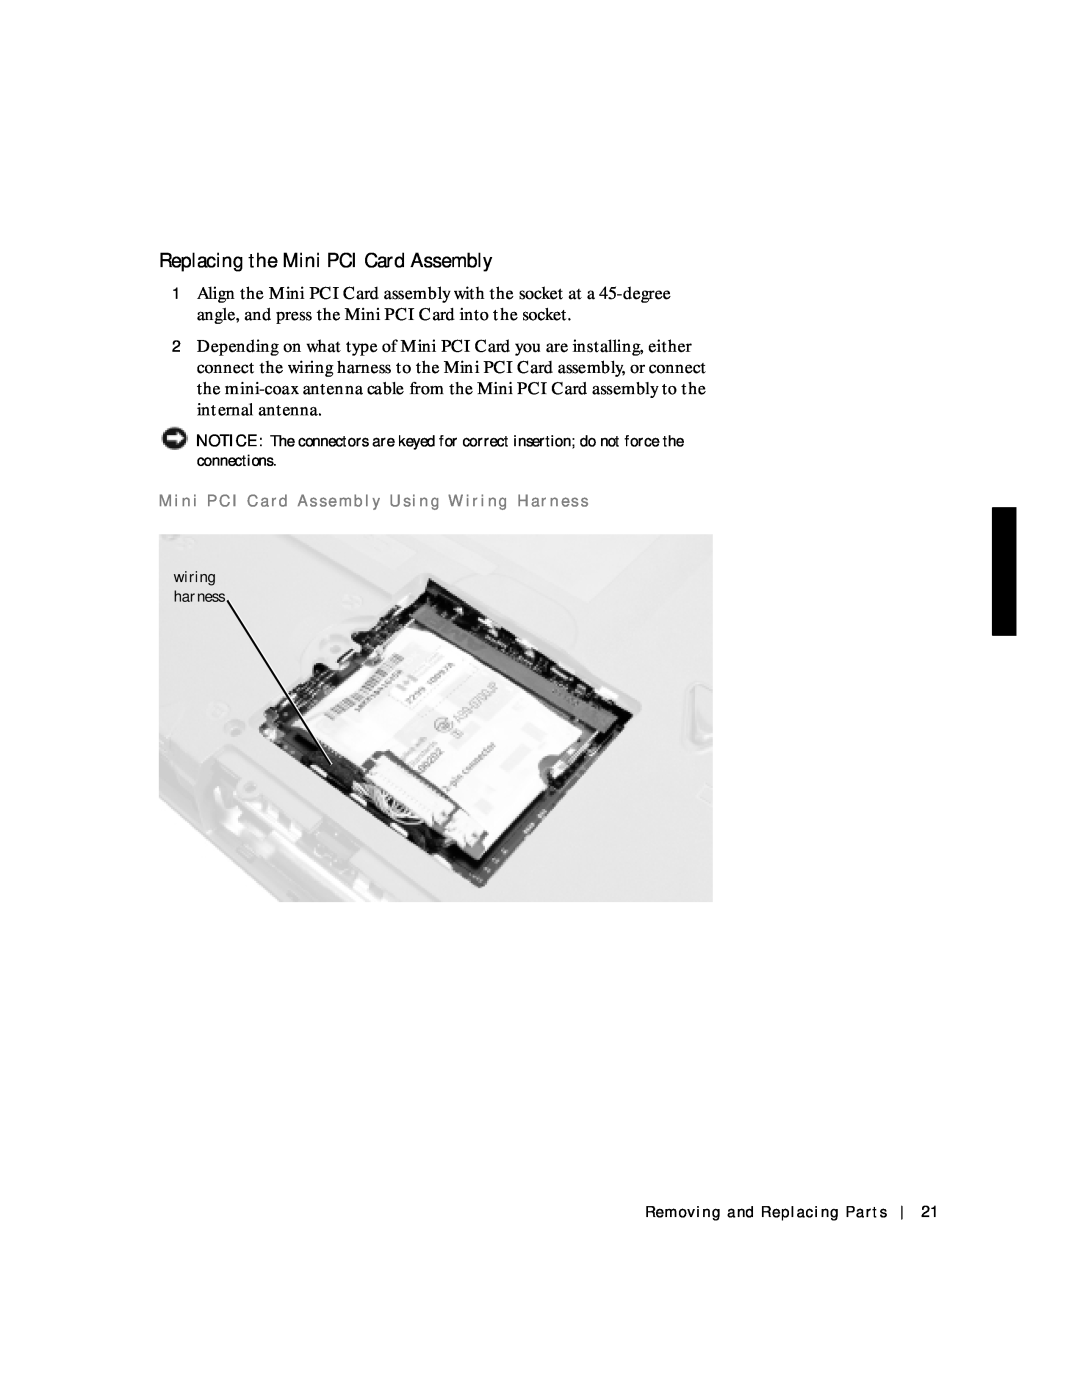 Applied Energy Products C800 service manual Replacing the Mini PCI Card Assembly 